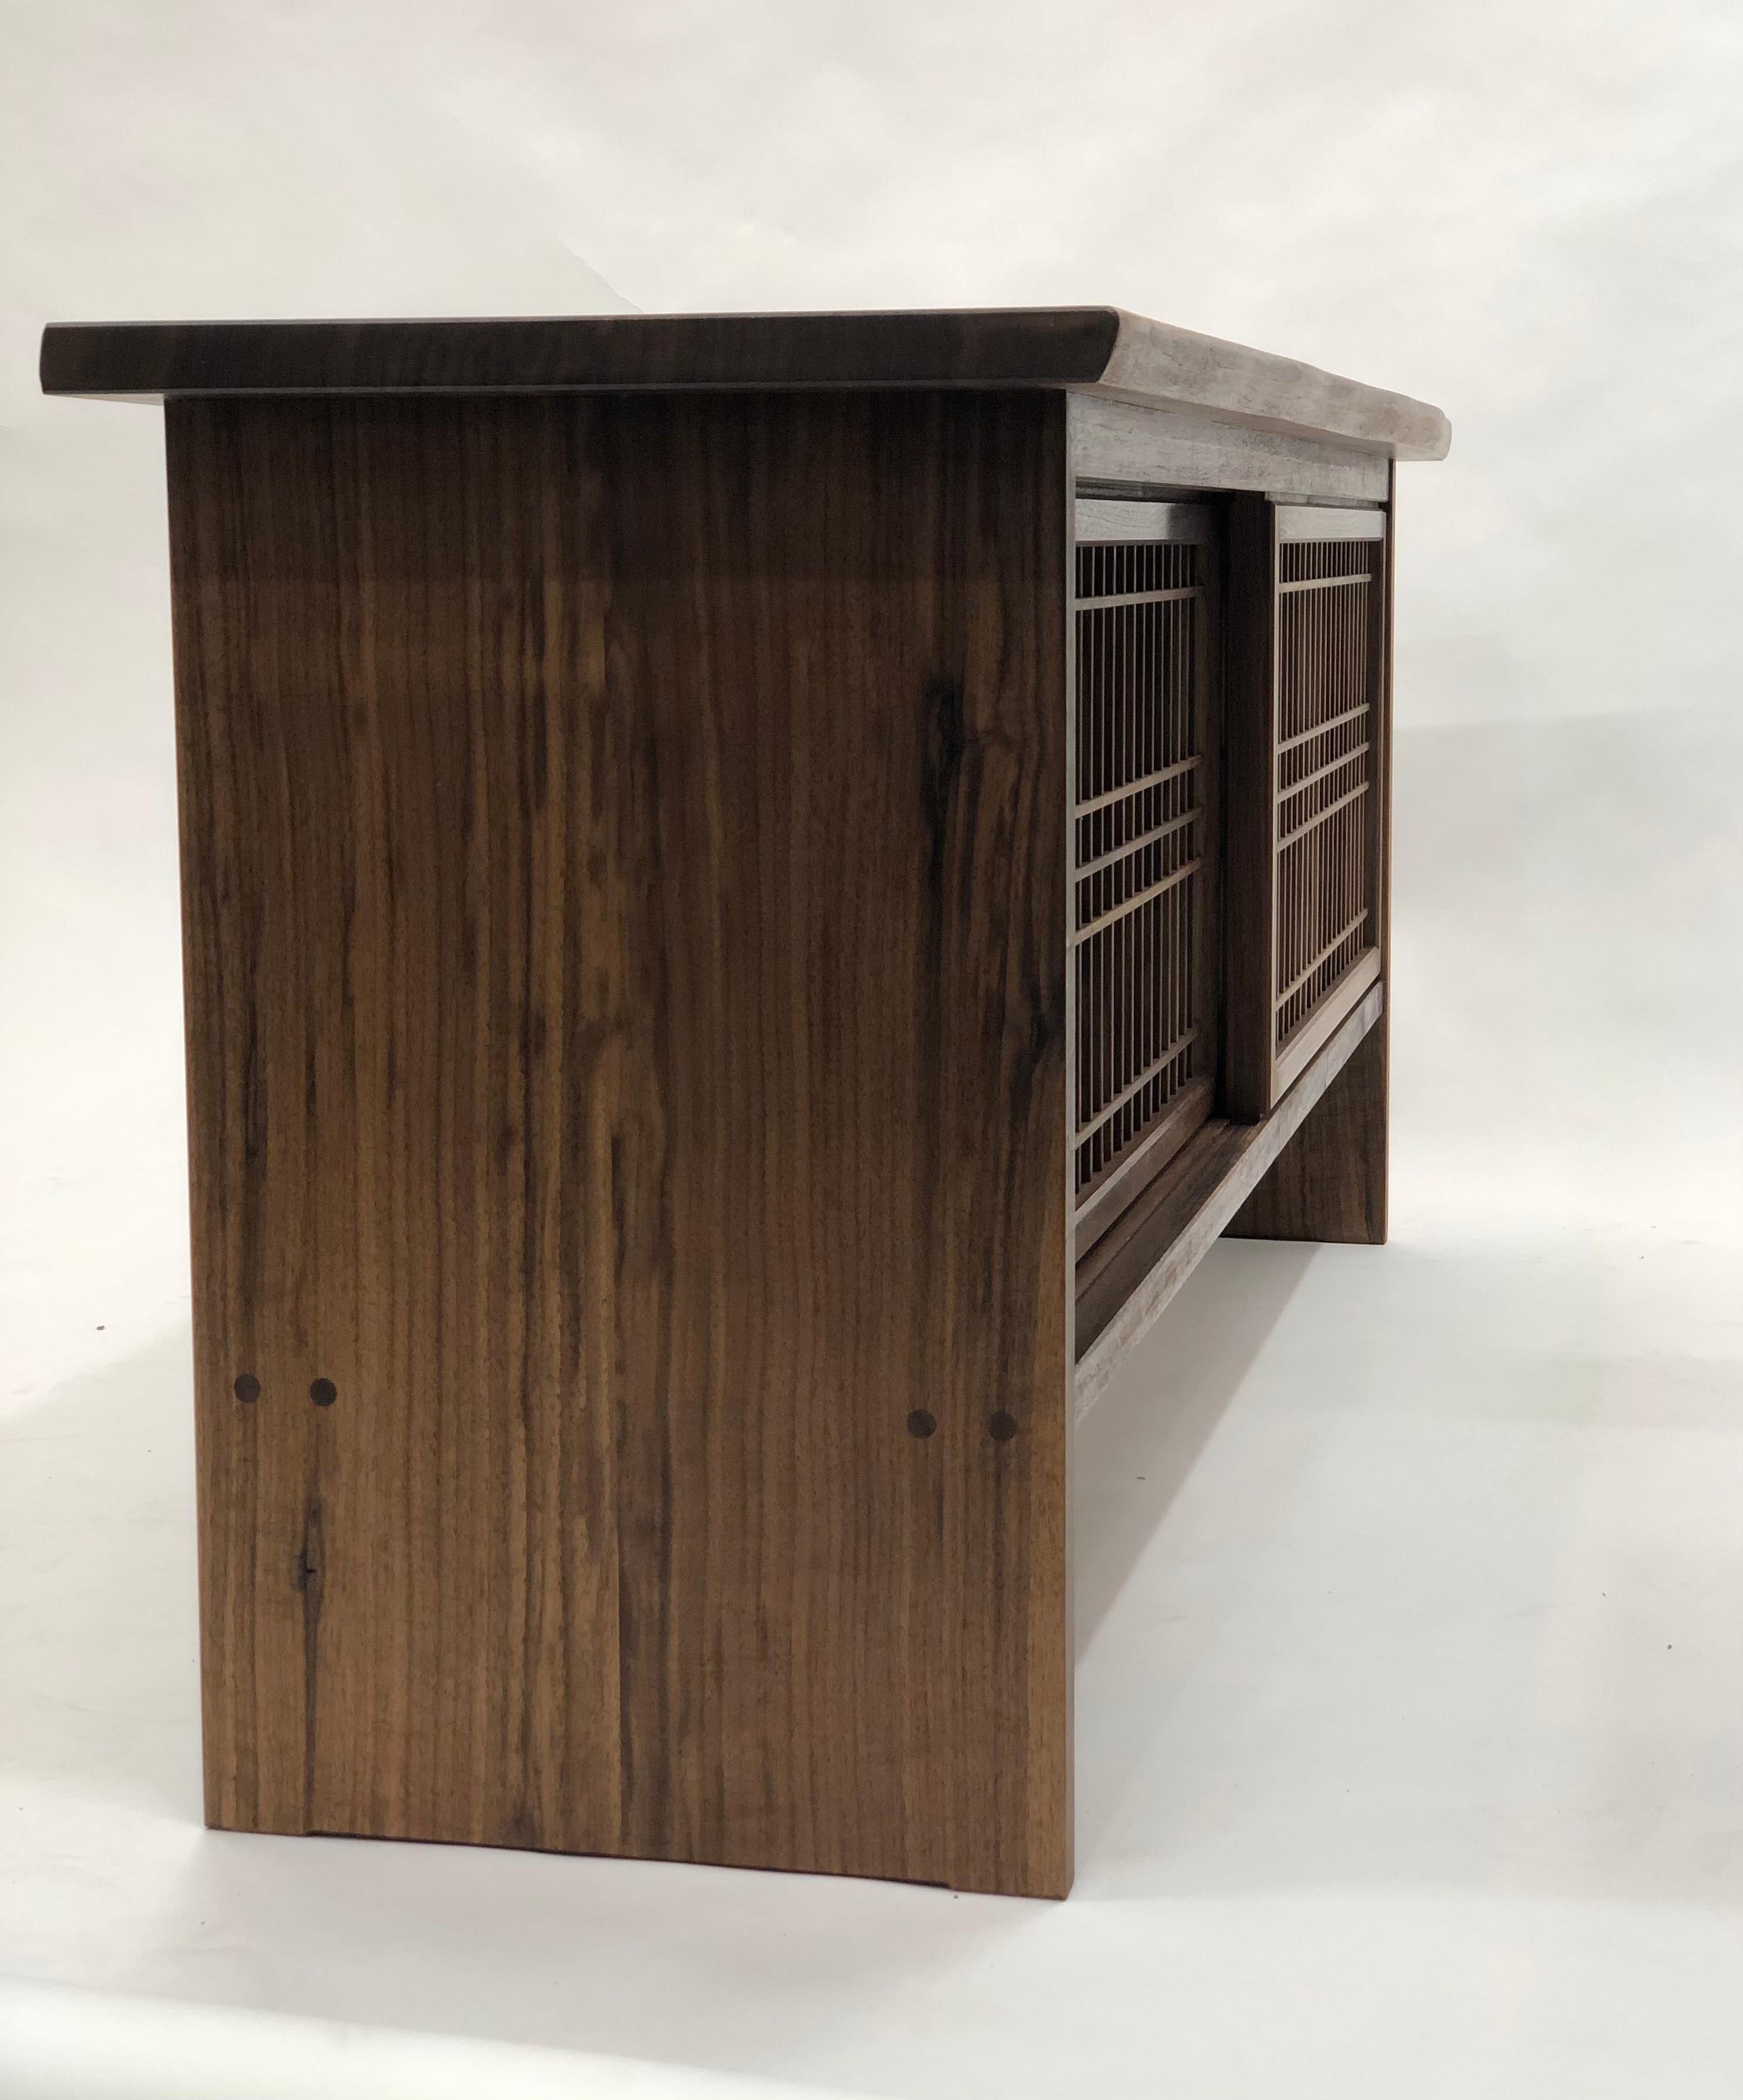 Walnut Credenza with Sliding Shoji Doors In New Condition For Sale In Princeton, NJ